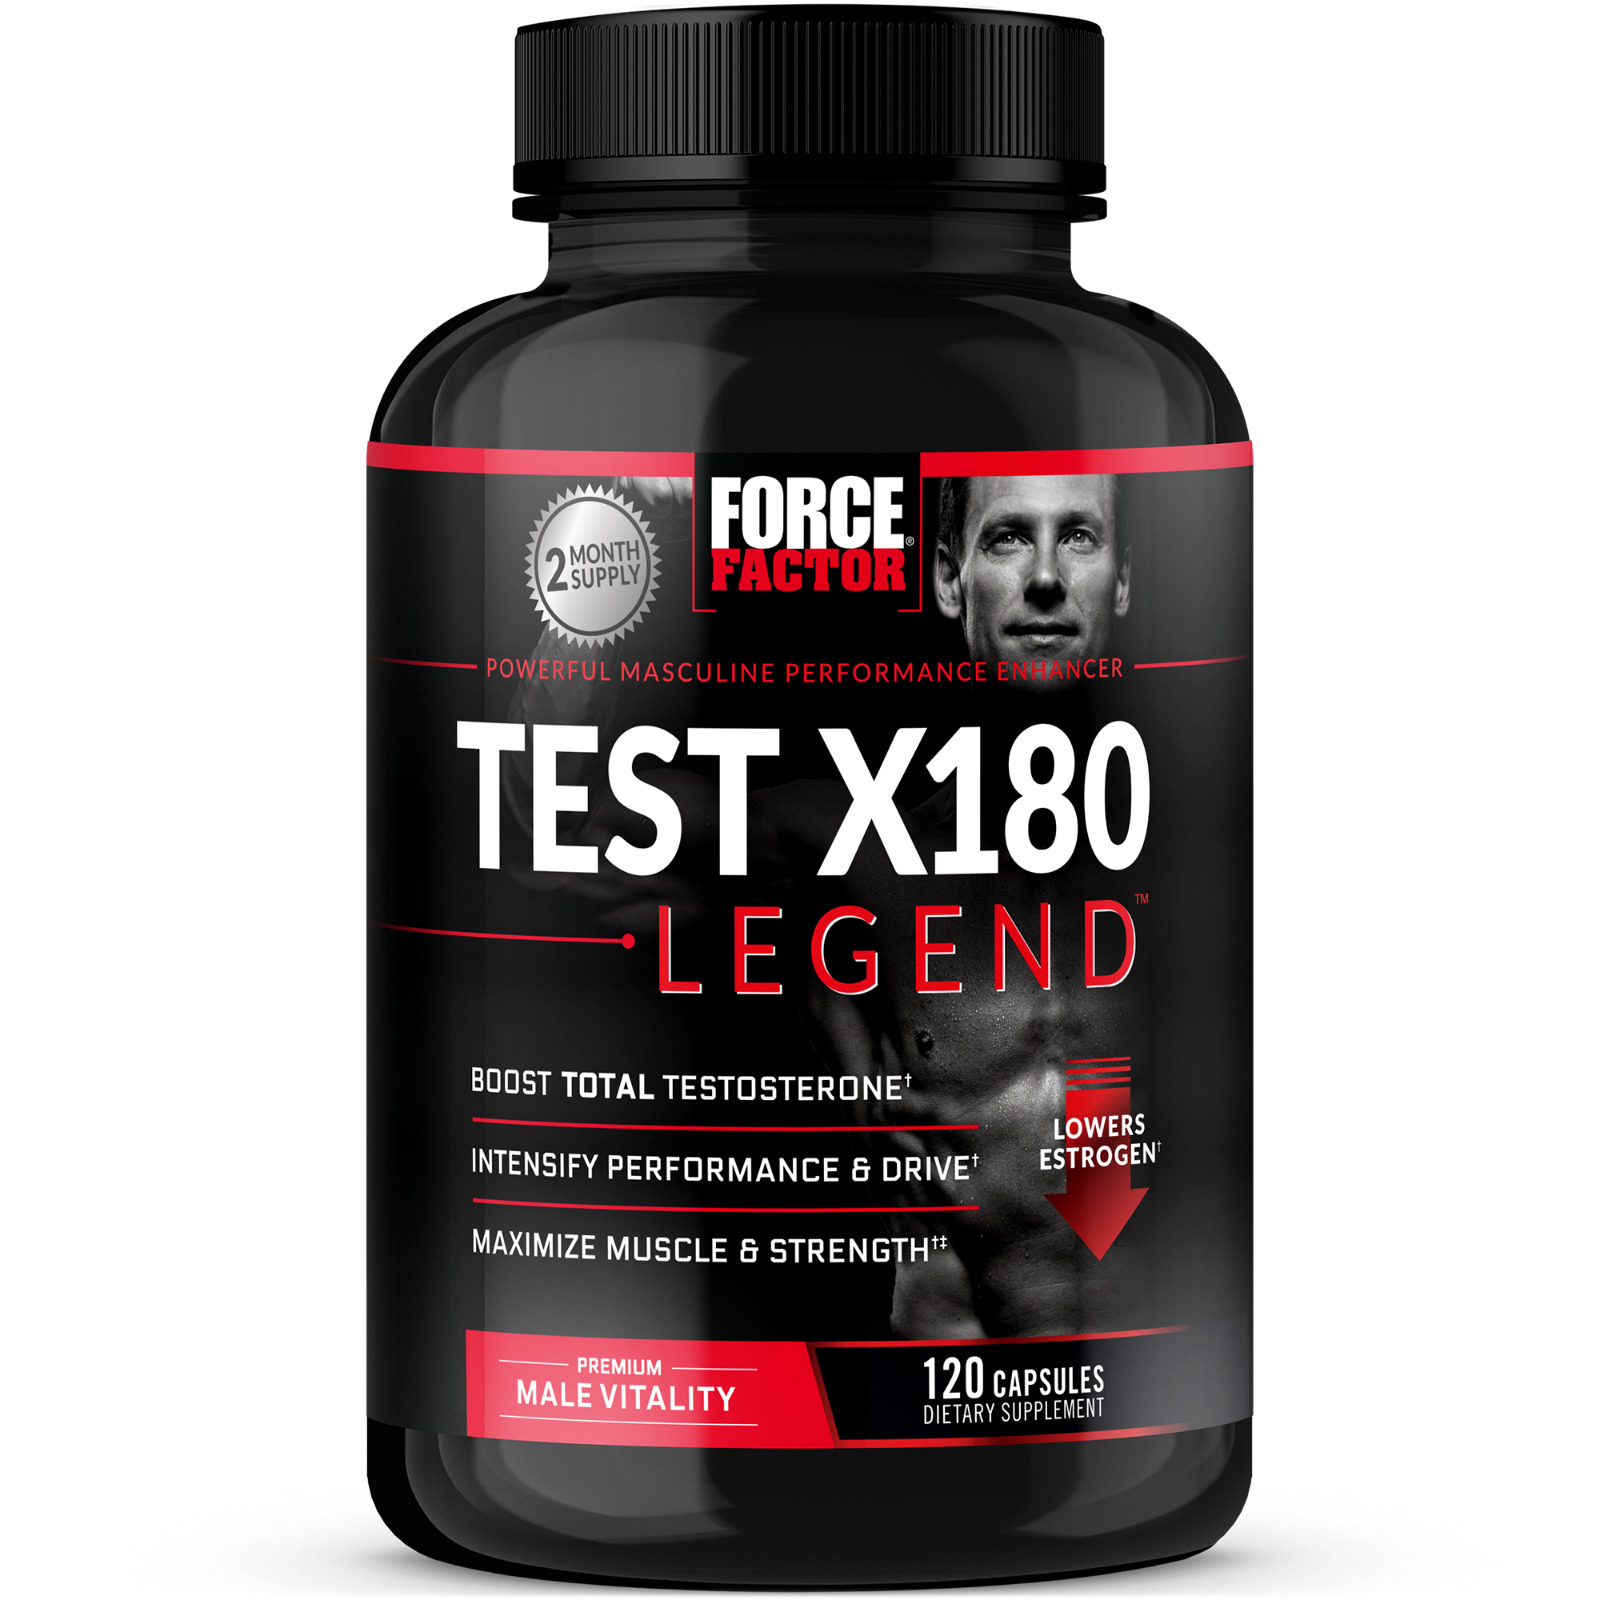 Force Factor Test X180 Legend - Testosterone Booster and Muscle Builder for Men 